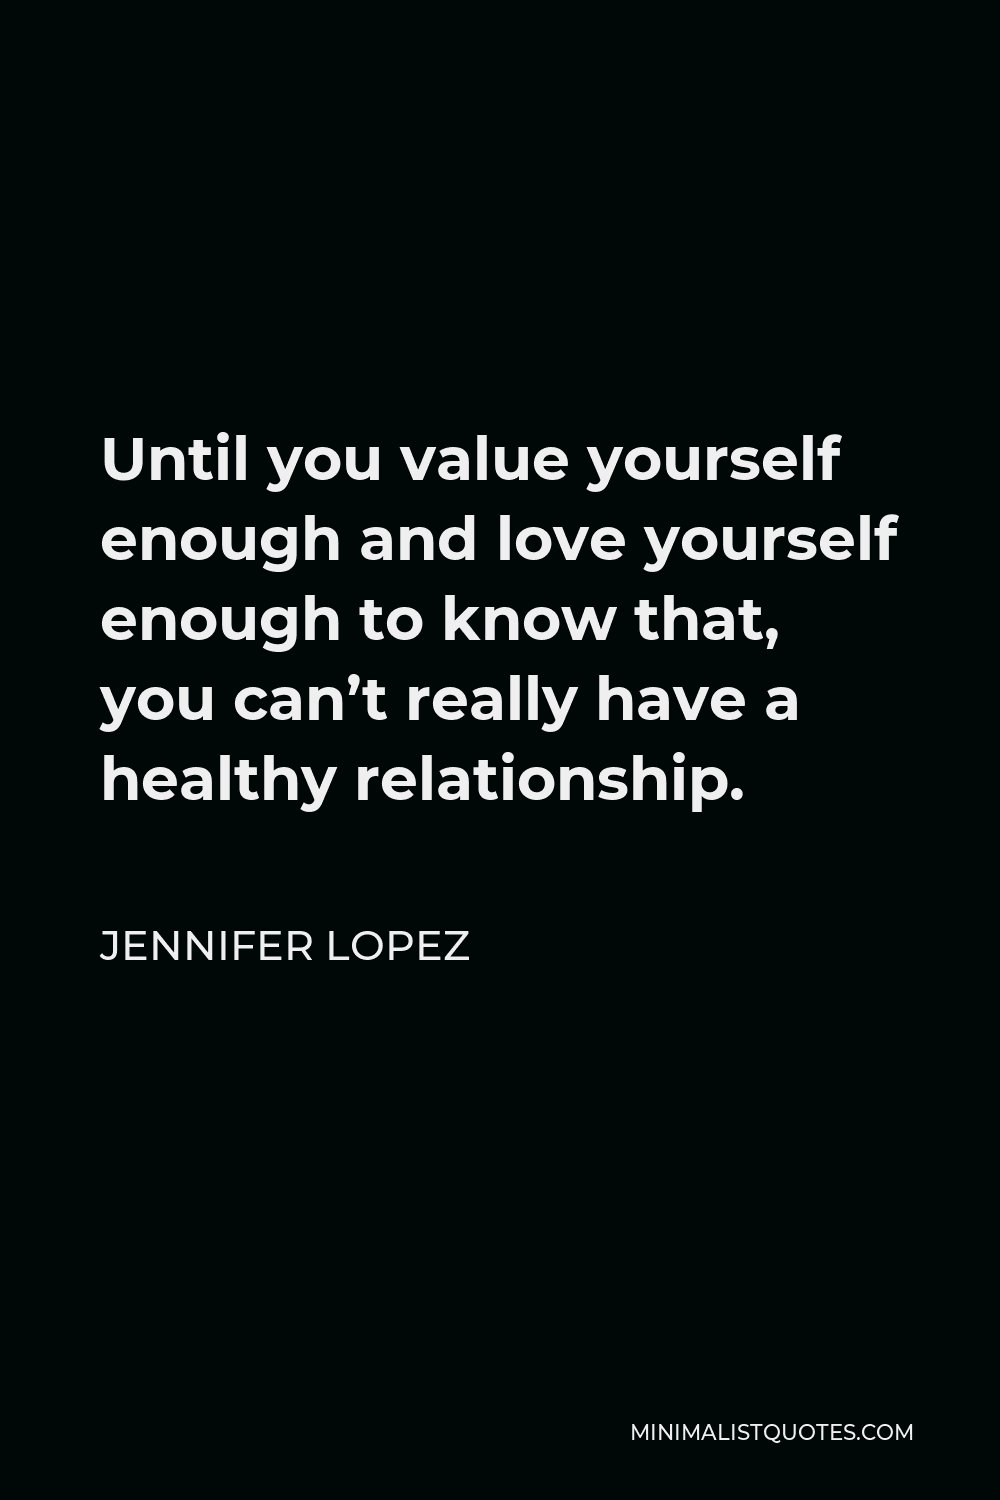 Jennifer Lopez Quote - Until you value yourself enough and love yourself enough to know that, you can’t really have a healthy relationship.